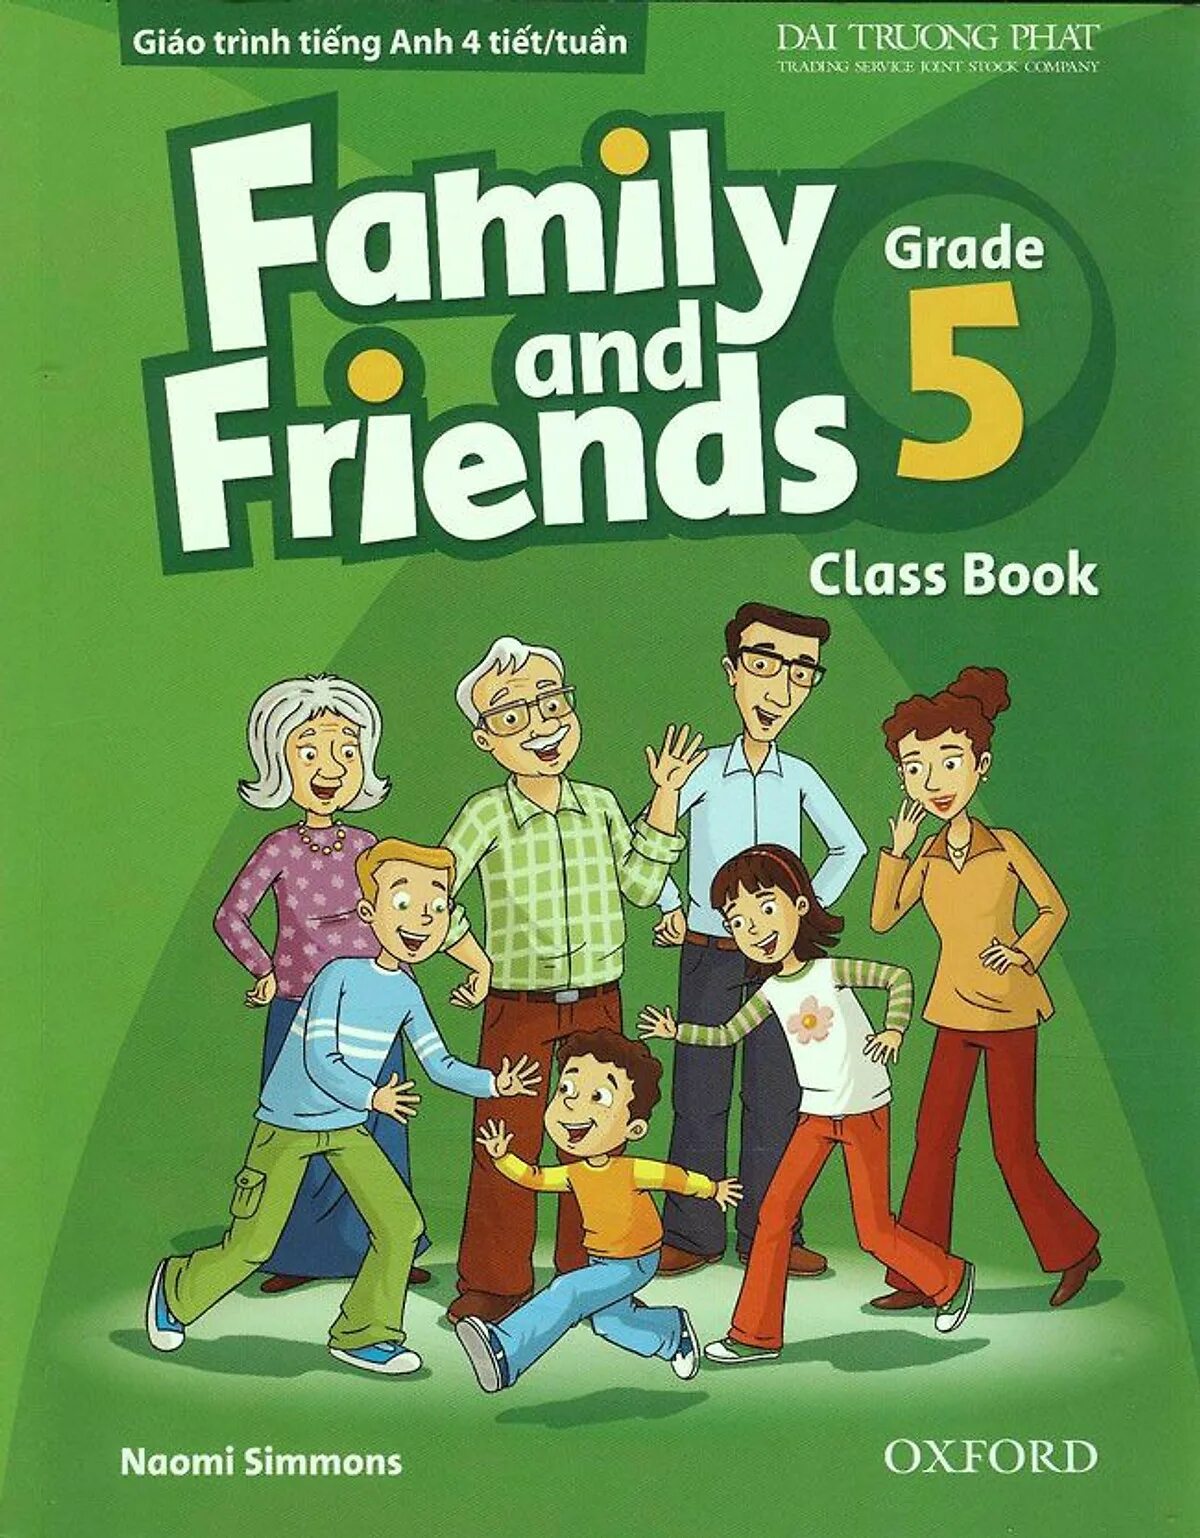 Family and friends students book. Учебник Family and friends 5. Family English учебник. Фэмили френдс 5. Английский Family and friends.